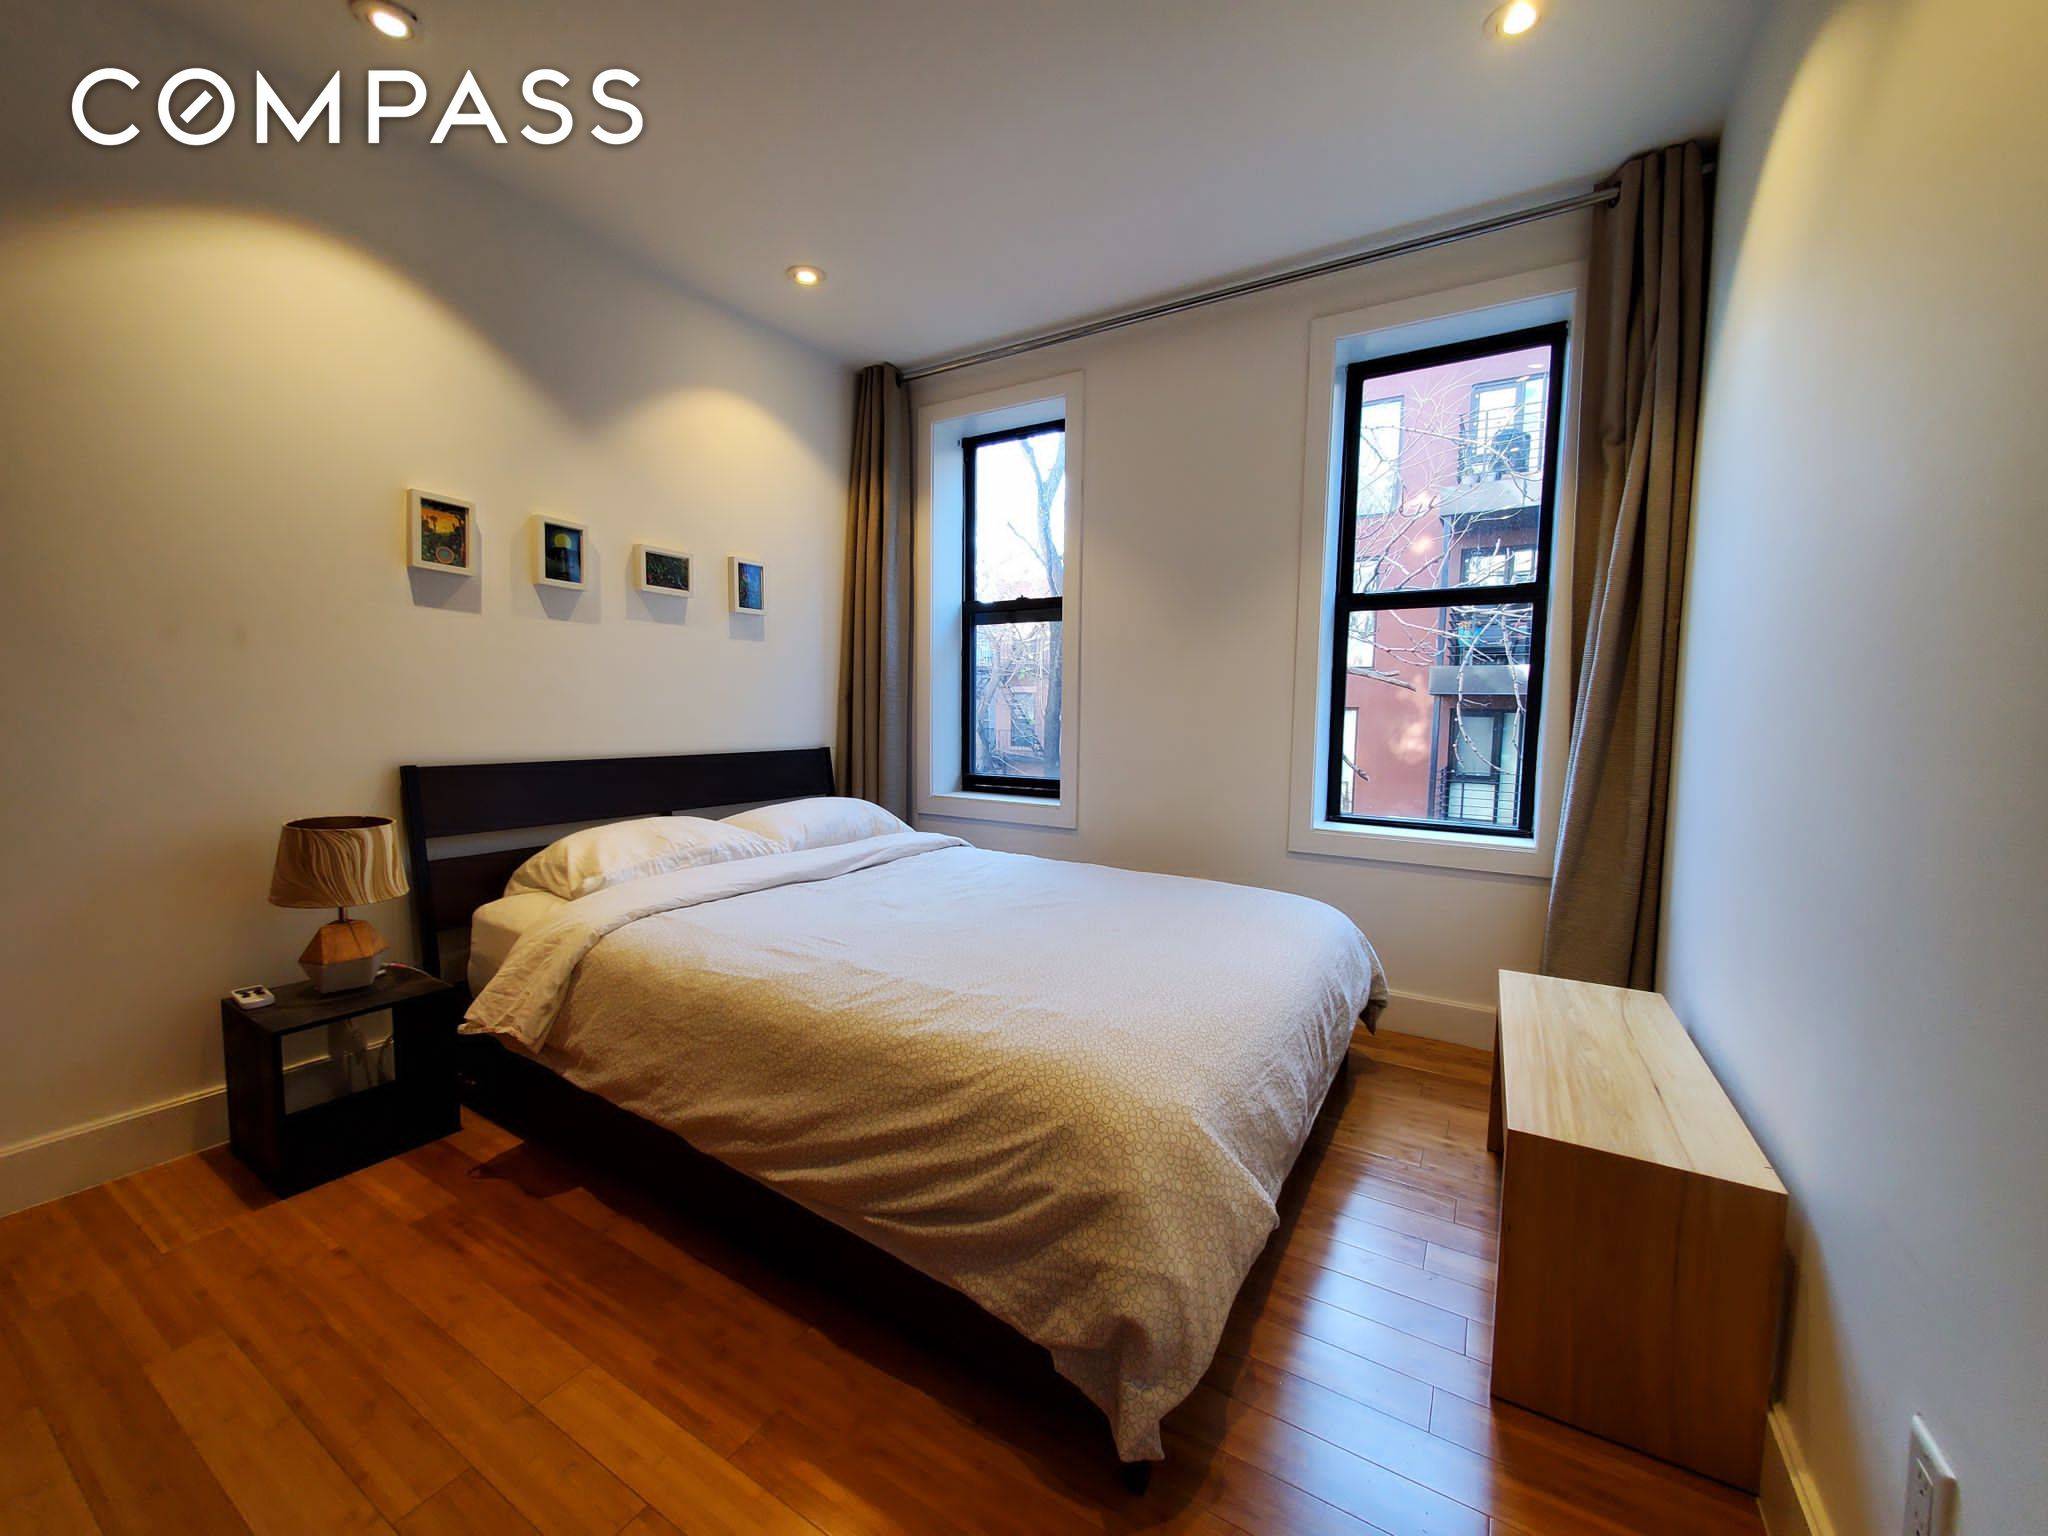 This charming two bedroom in South Williamsburg has been beautifully renovated and maintained.